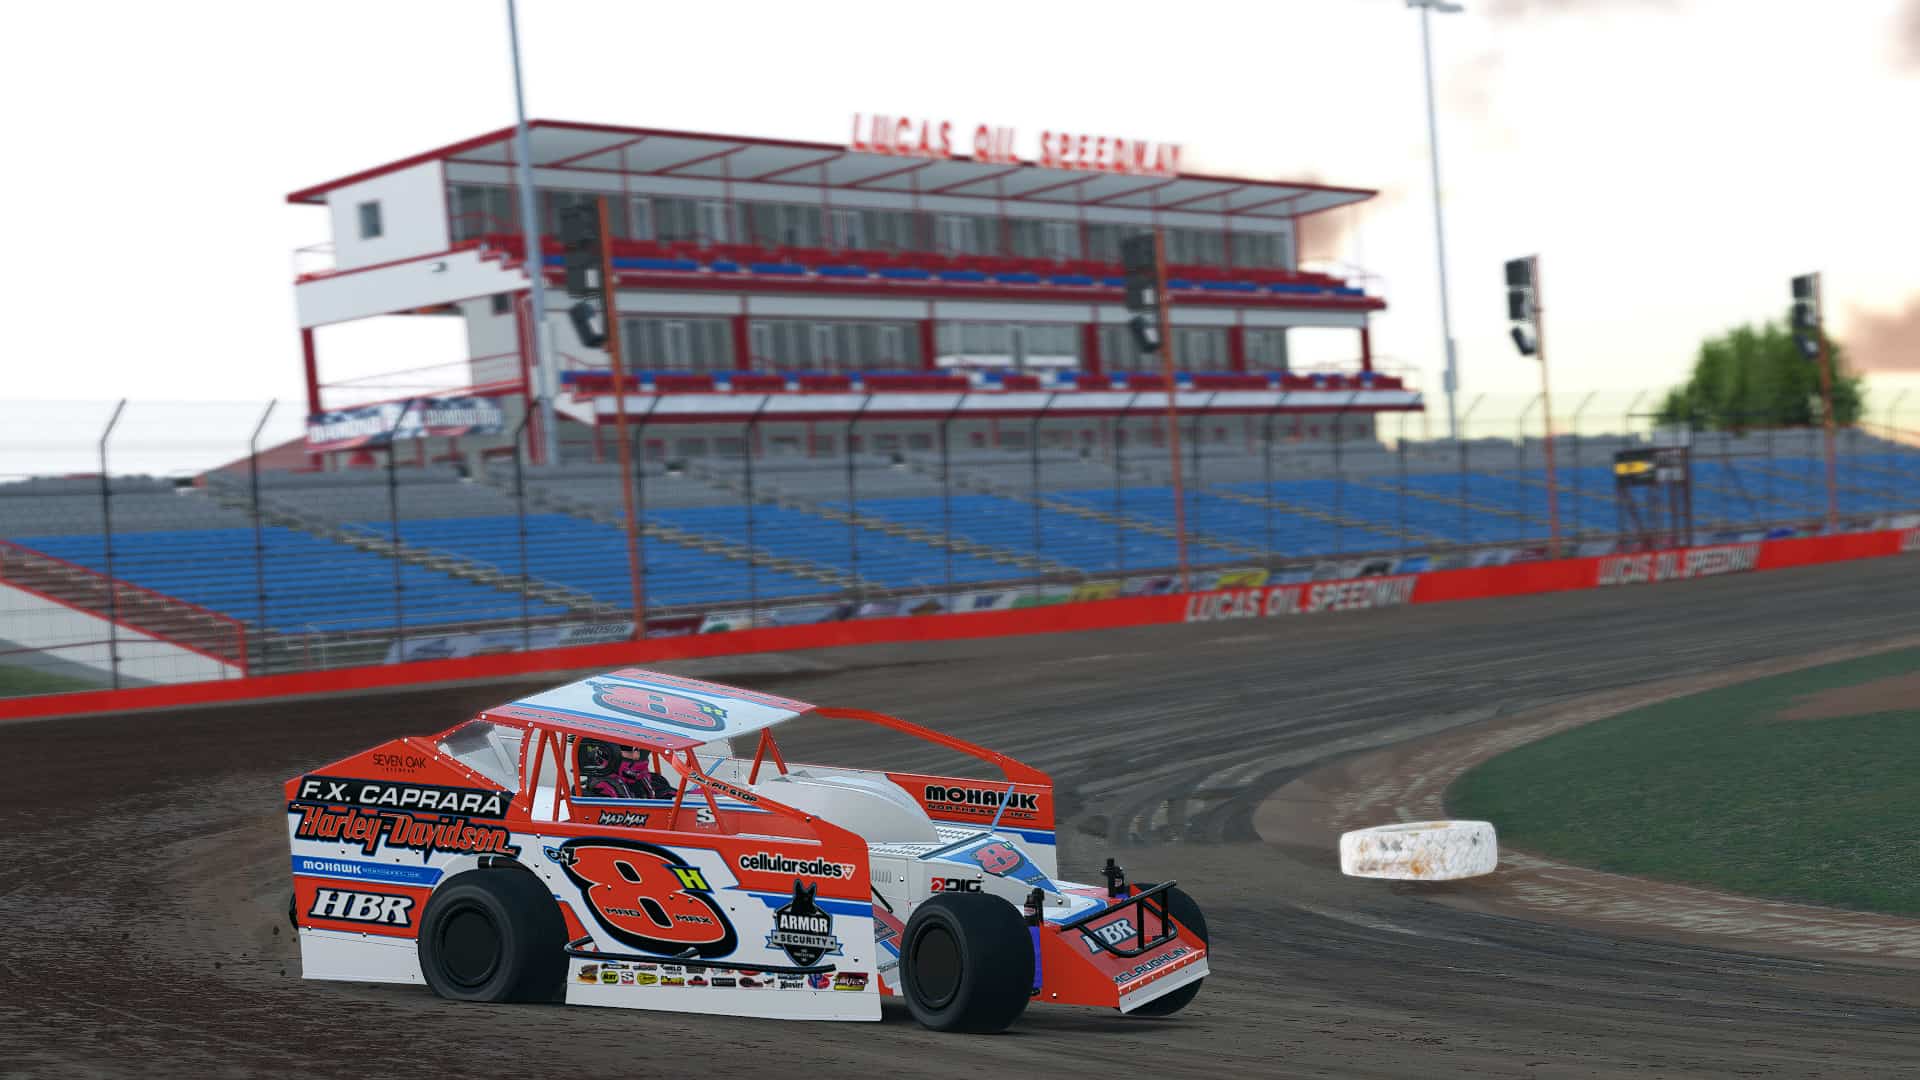 World of Outlaws Big Block Modified, Lucas Oil DLC releases 28th